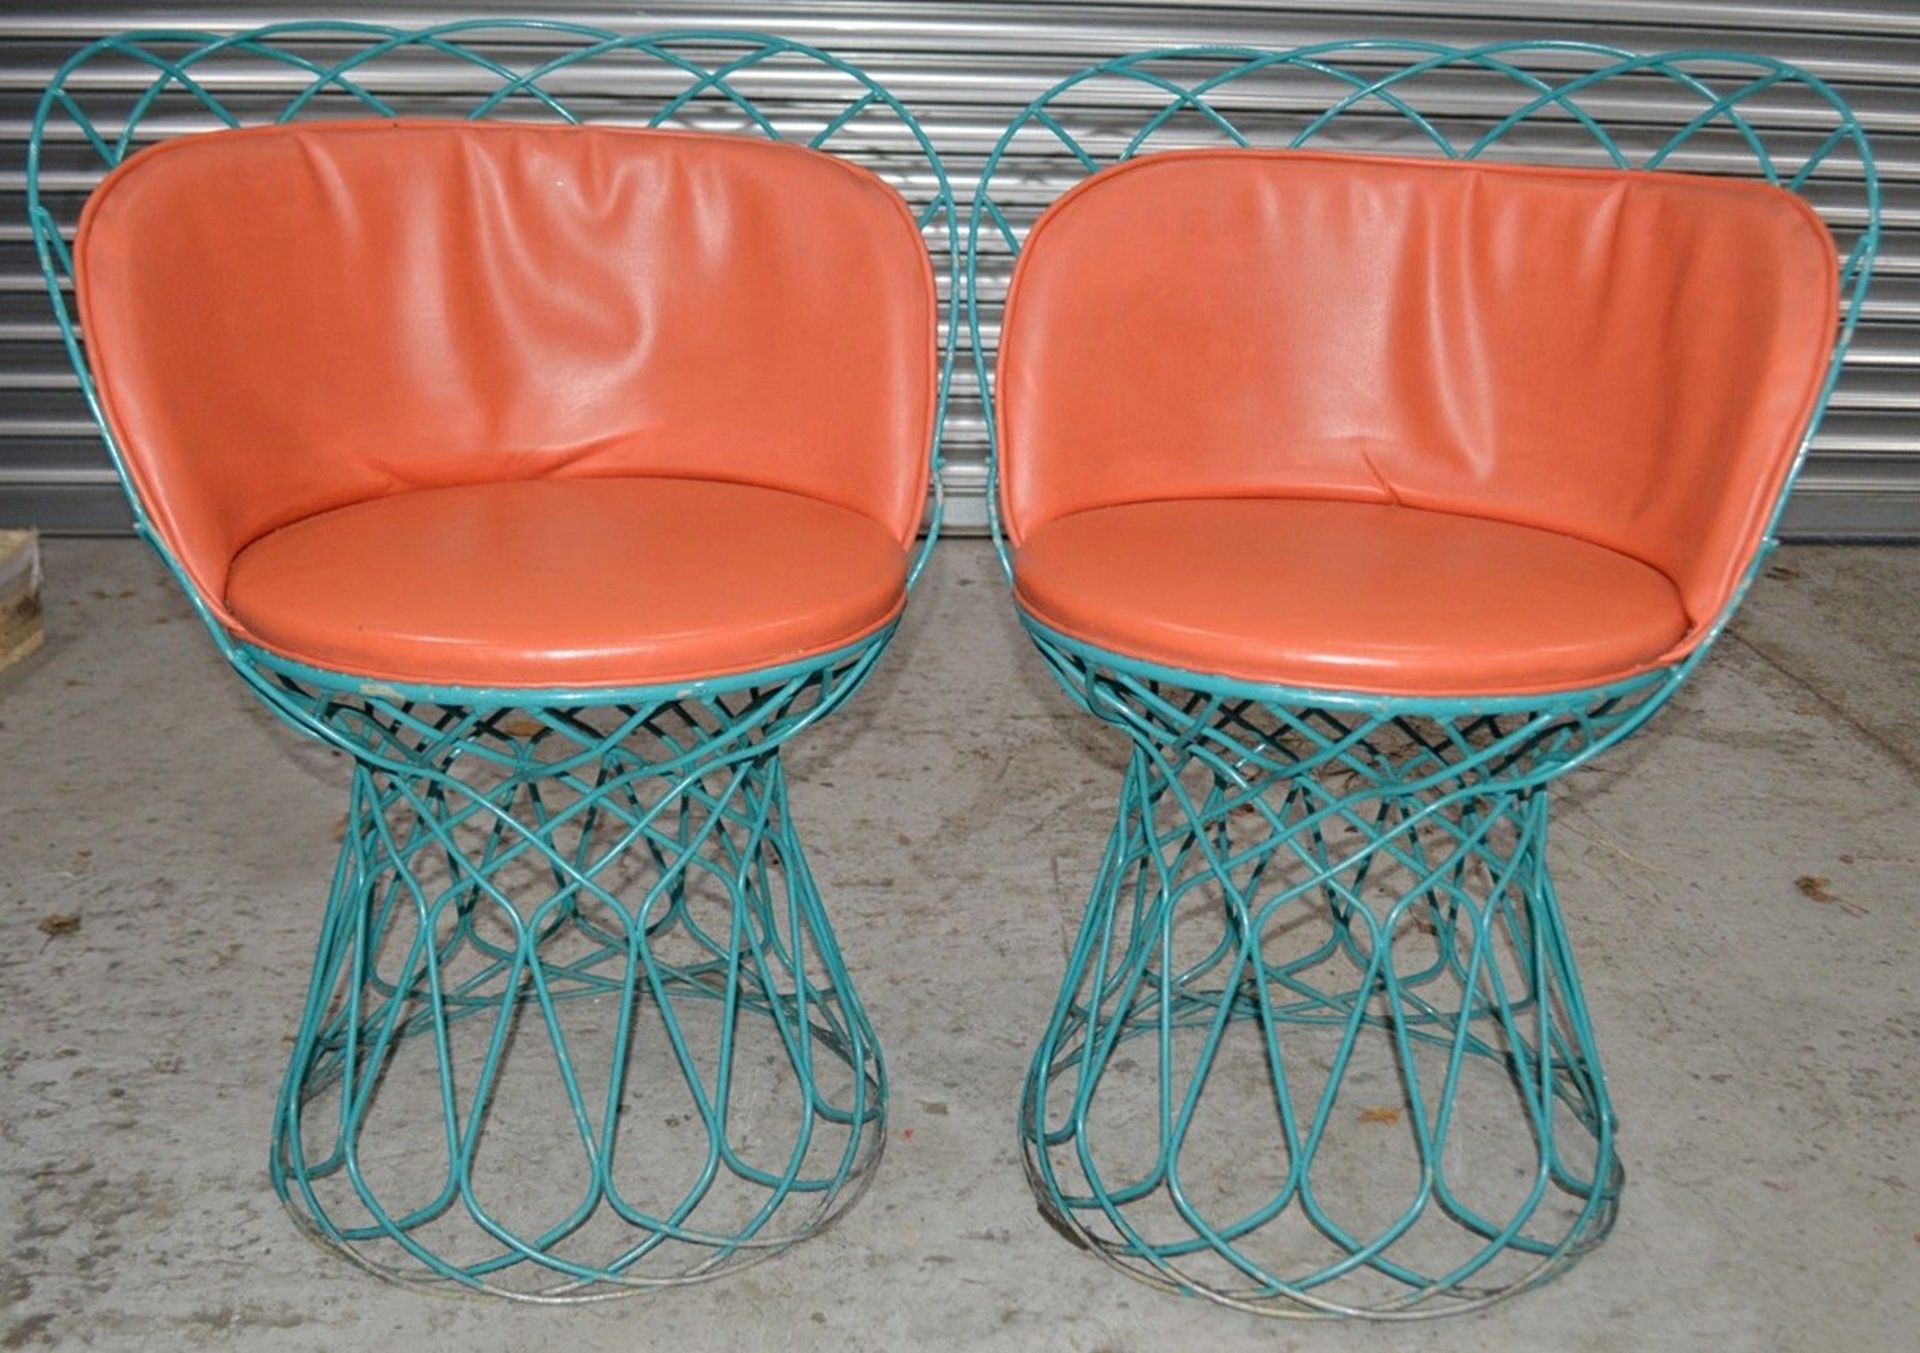 2 x Commercial Outdoor Wire Bistro Chairs With Padded Seats In Orange - Dimensions: H80 x W62 x D45c - Image 2 of 6